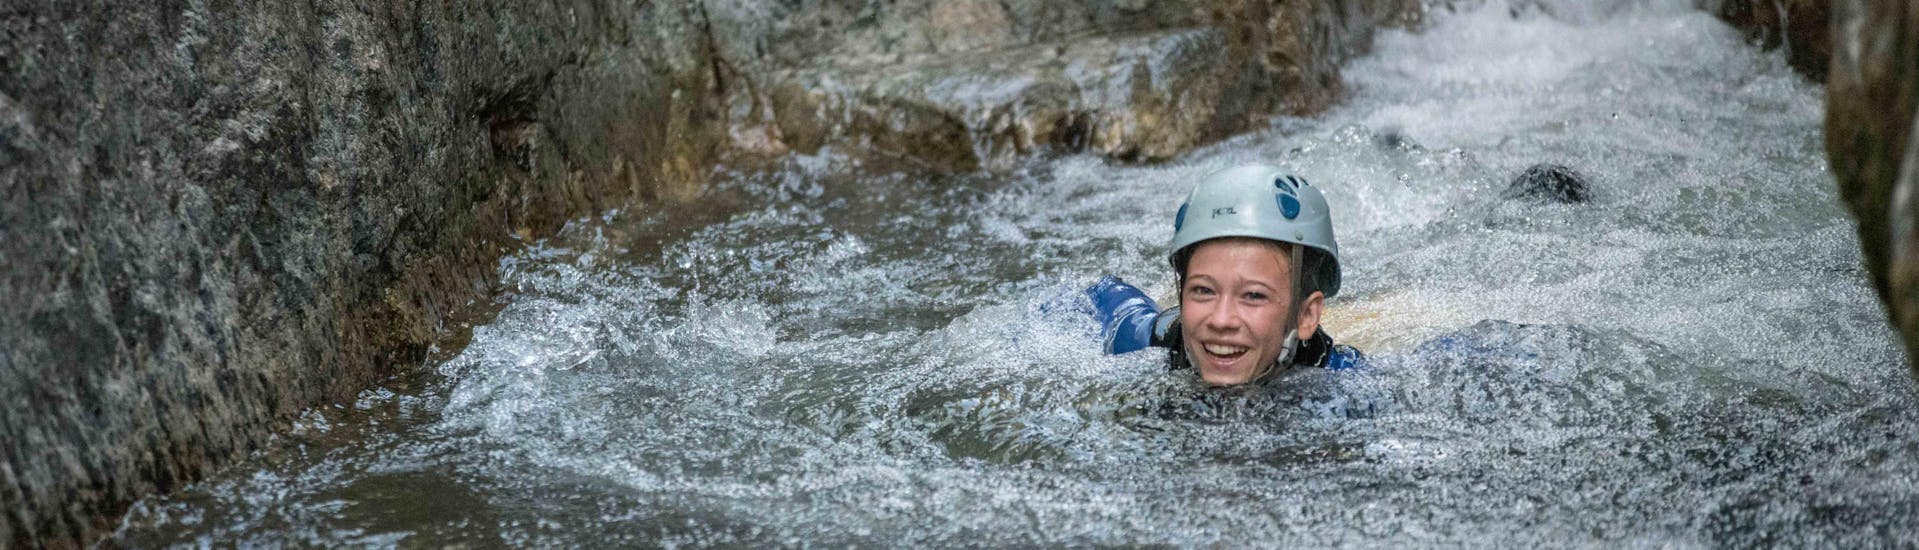 Canyoning Discovery nel canyon di Haute Besorgues nell'Ardèche.